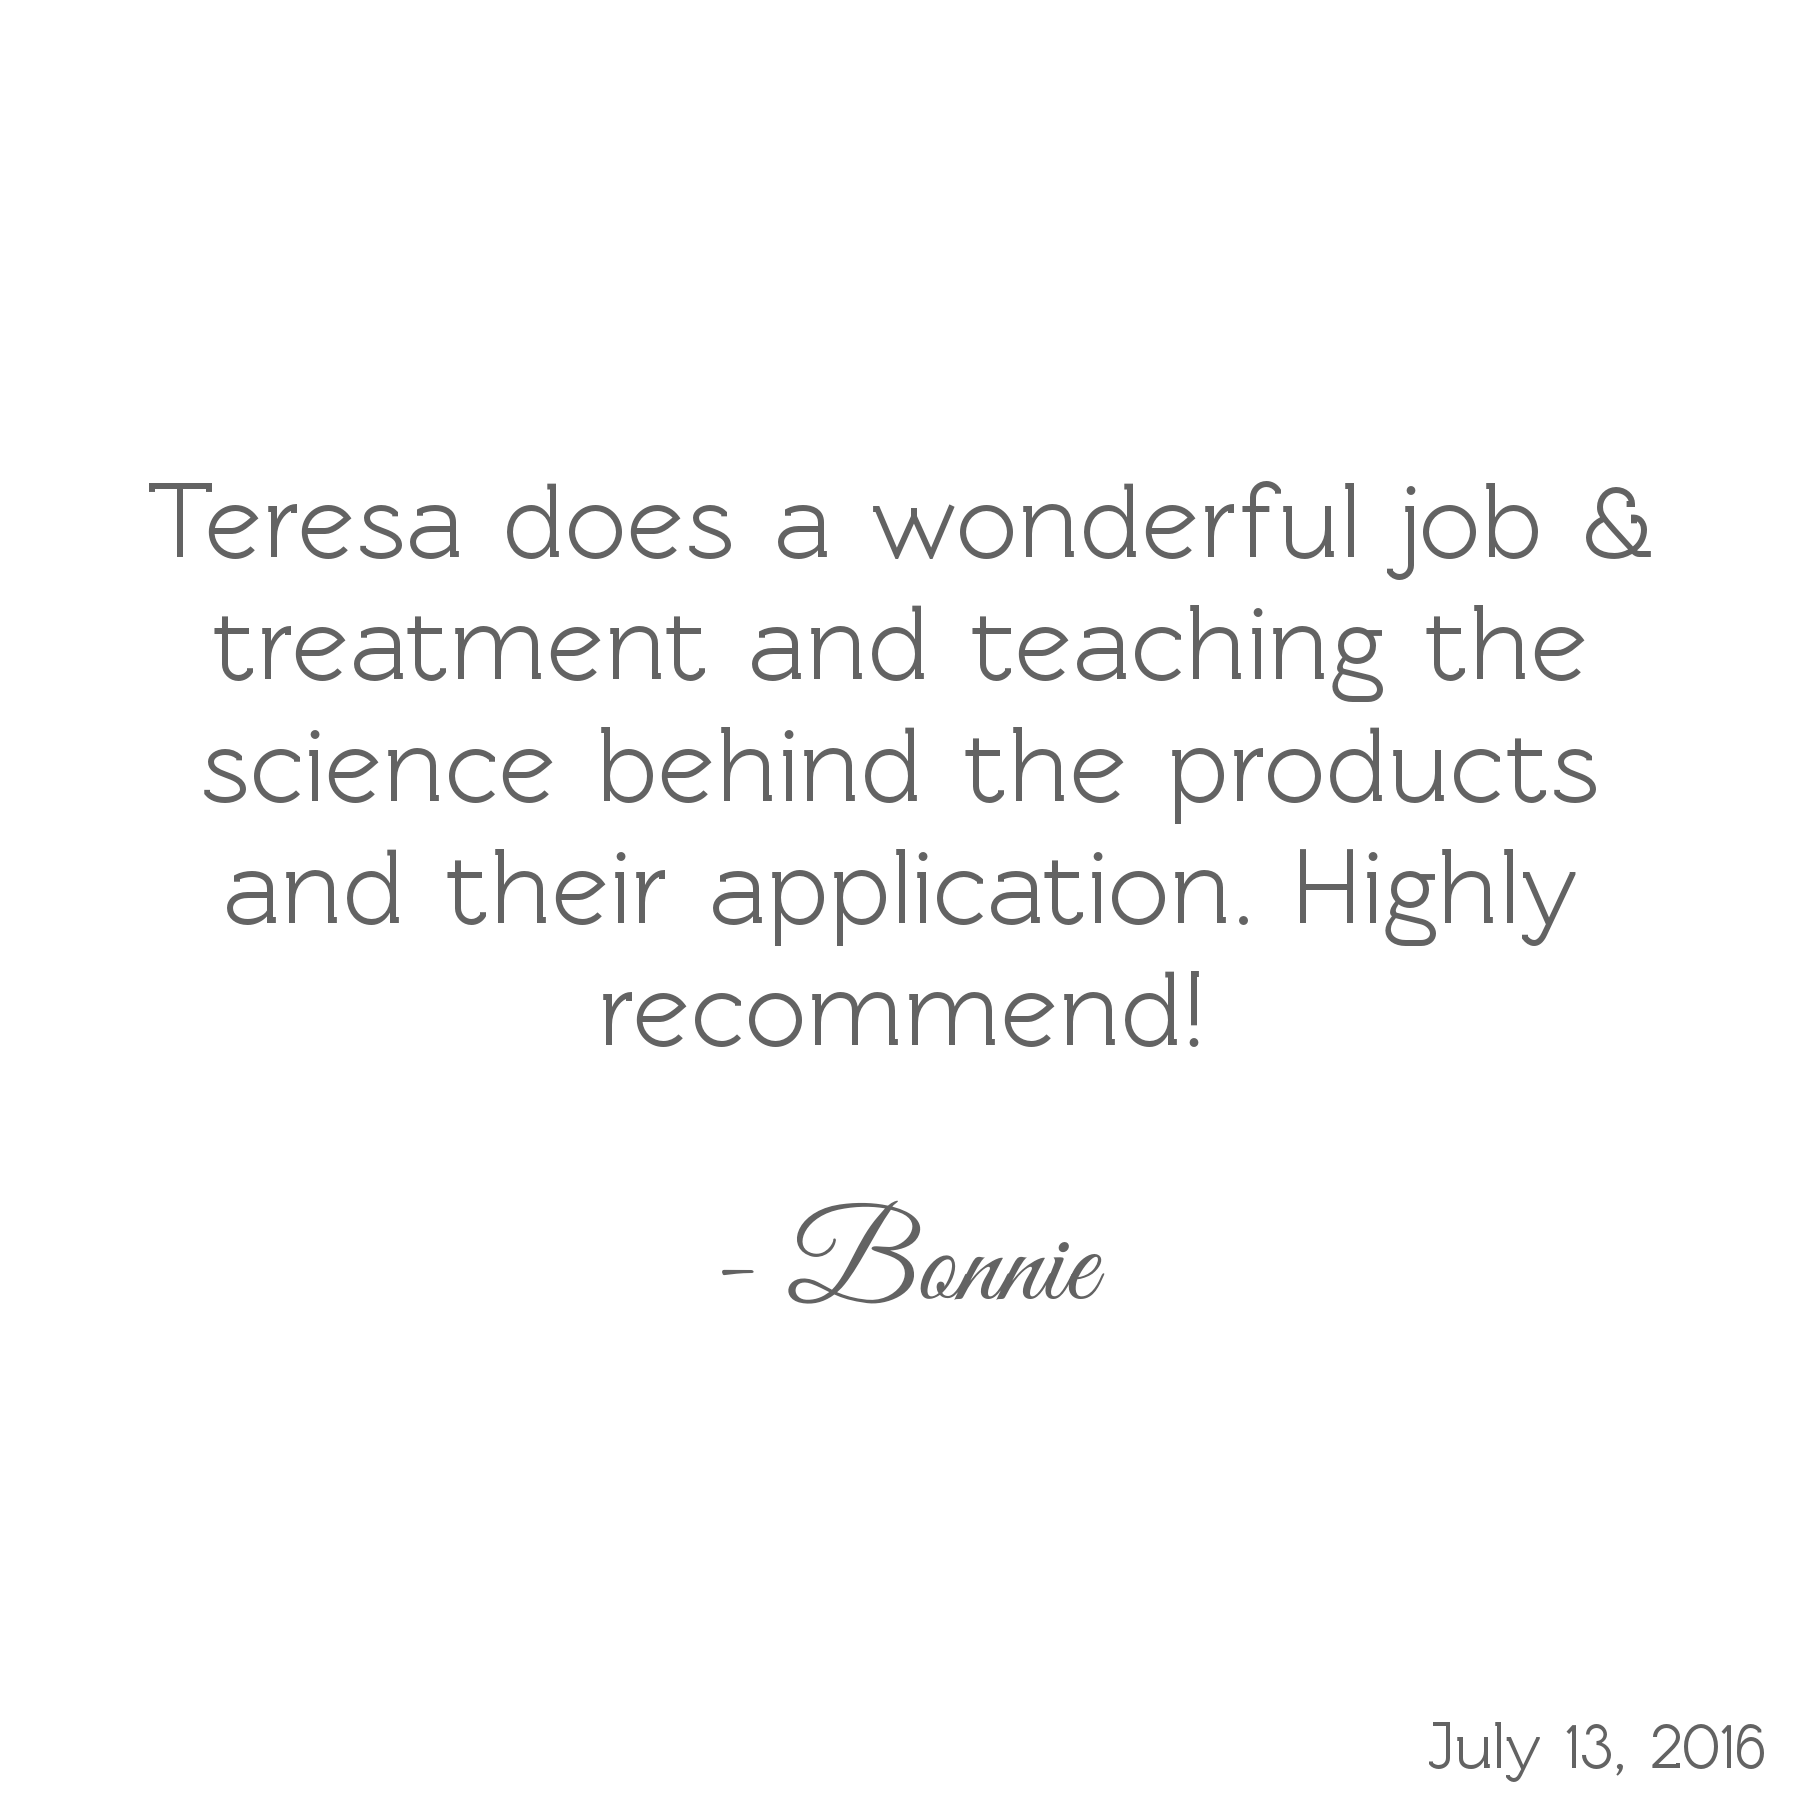 Teresa does a wonderful job & treatment and teaching the science behind the products and their application. Highly recommend! -Bonnie